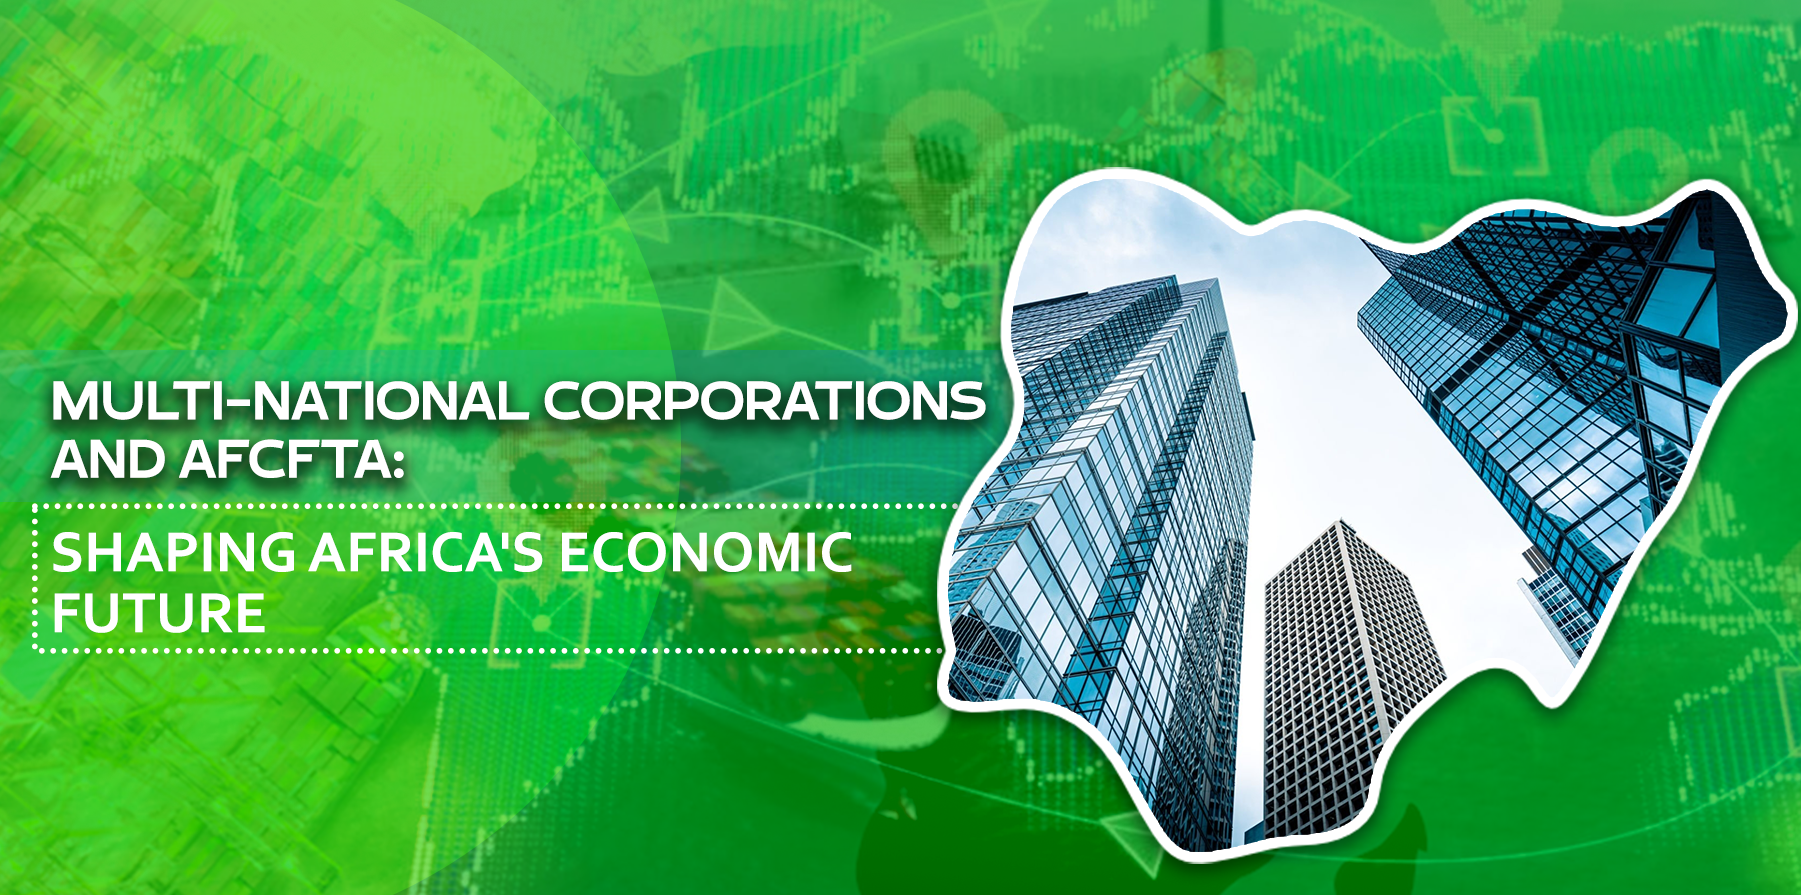 MULTINATIONAL CORPORATIONS AND AFCFTA: SHAPING AFRICA'S ECONOMIC FUTURE